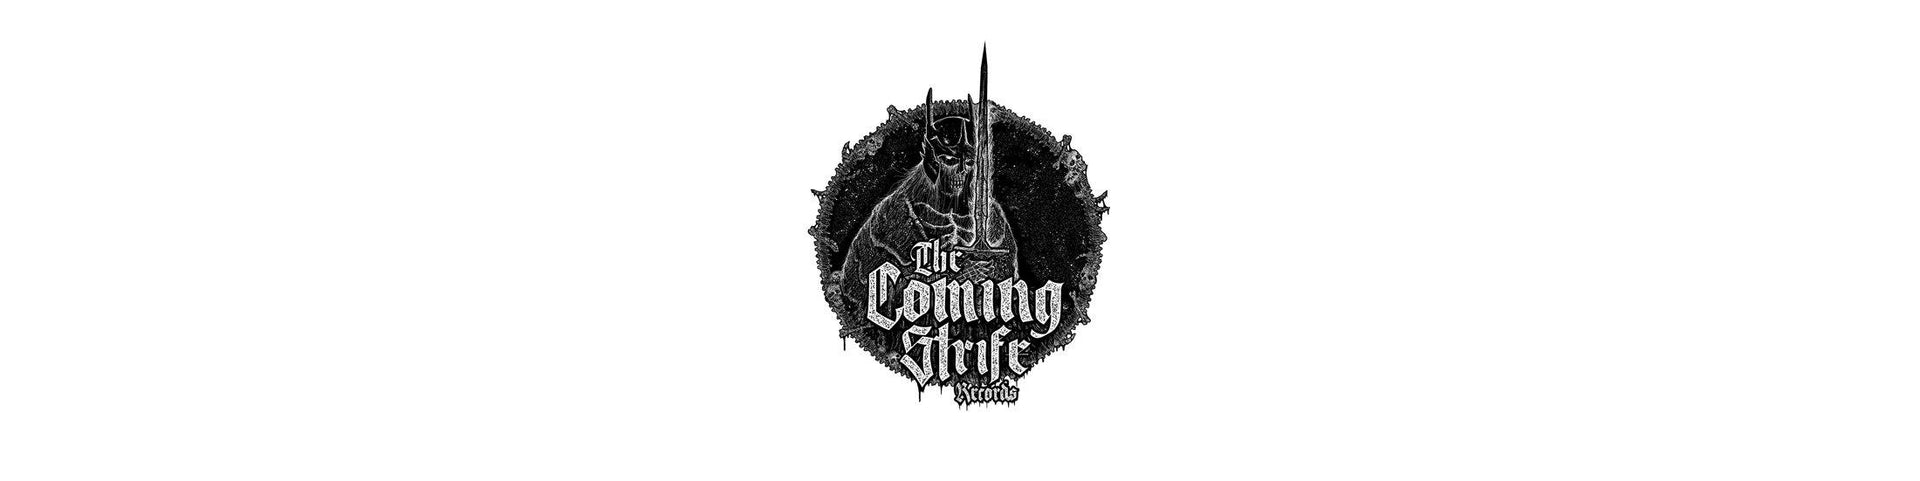 Shop – The Coming Strife – Band & Music Merch – Cold Cuts Merch